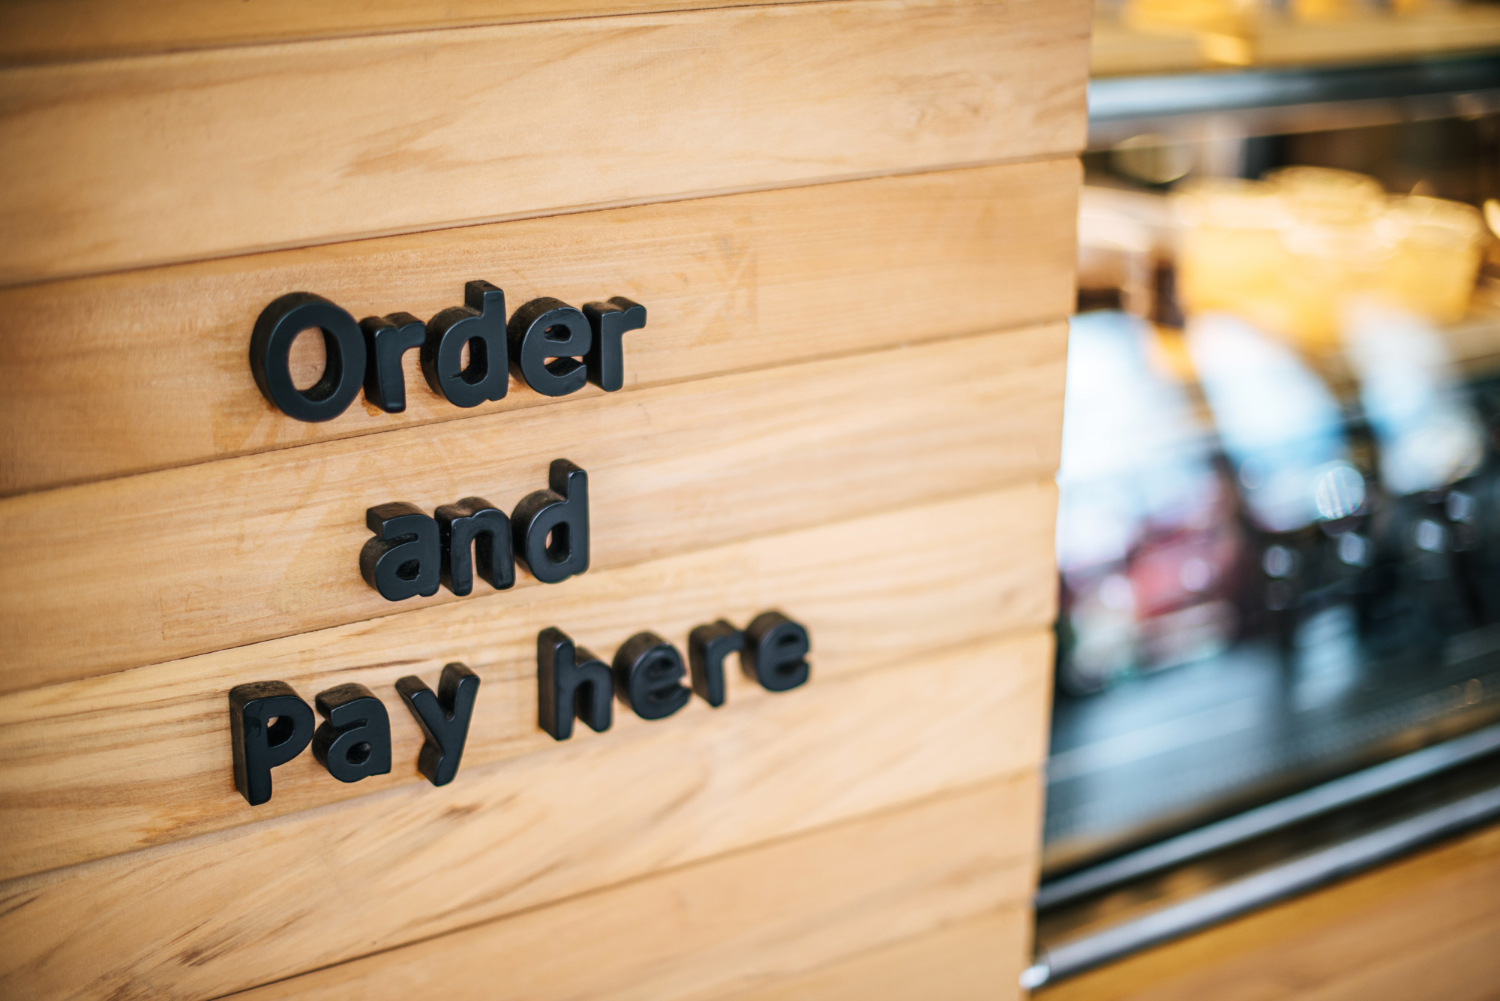 The words "order and pay here" are mounted on a wood wall at a fast casual dining restaurant. A display case full of bakery items is visible, out of focus, in the background.